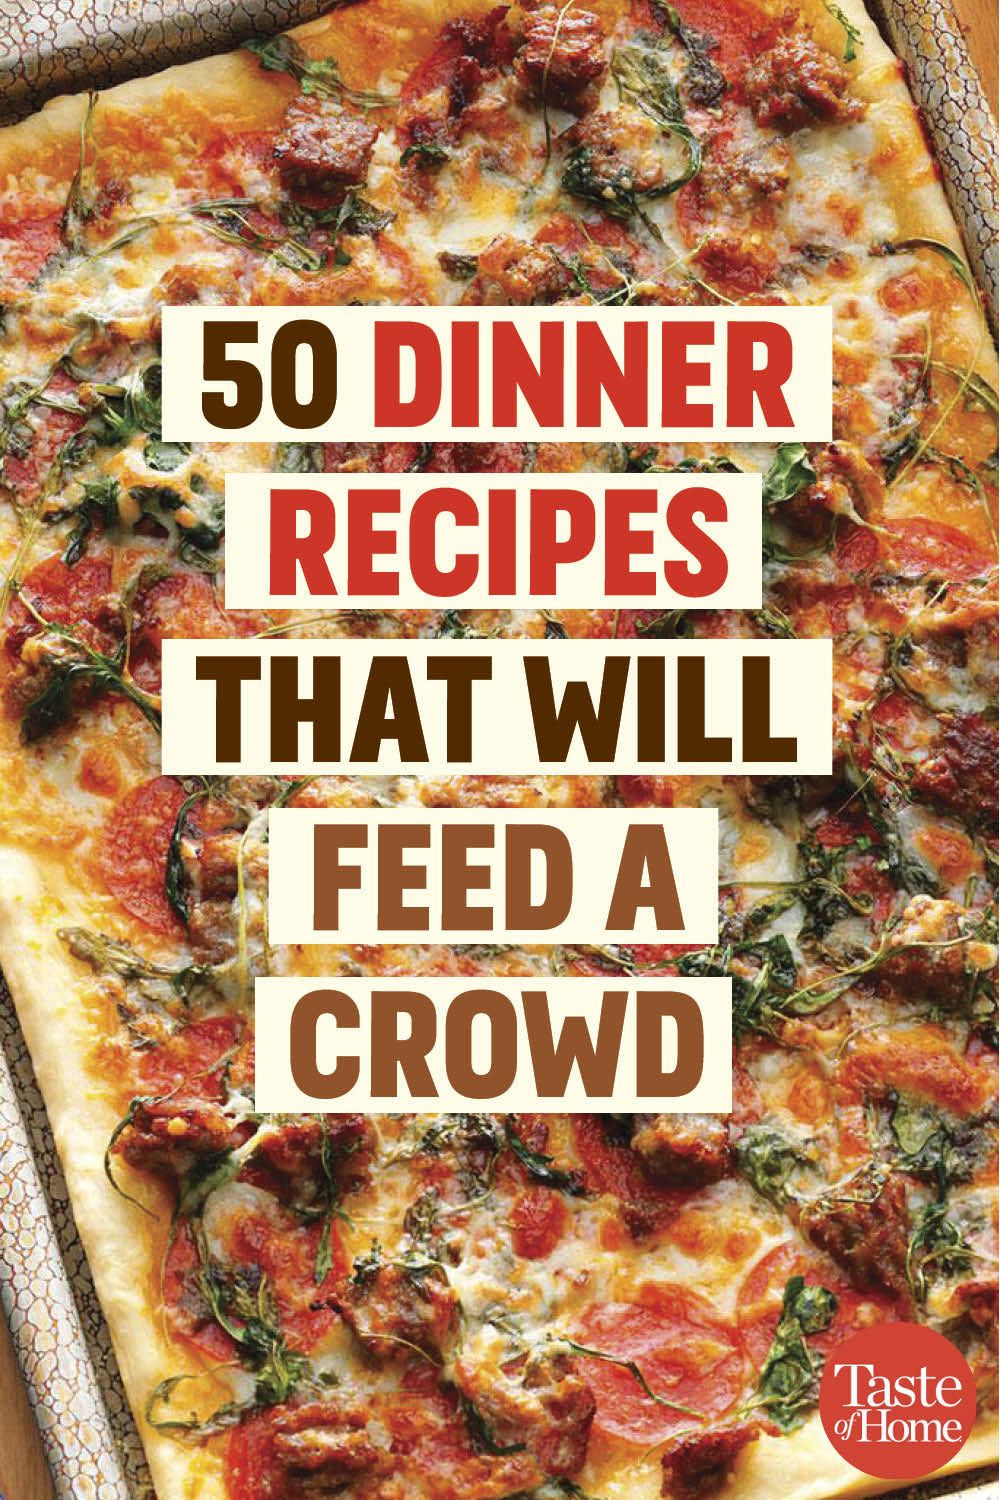 Group Dinner Ideas
 50 Dinner Recipes That Will Feed a Crowd